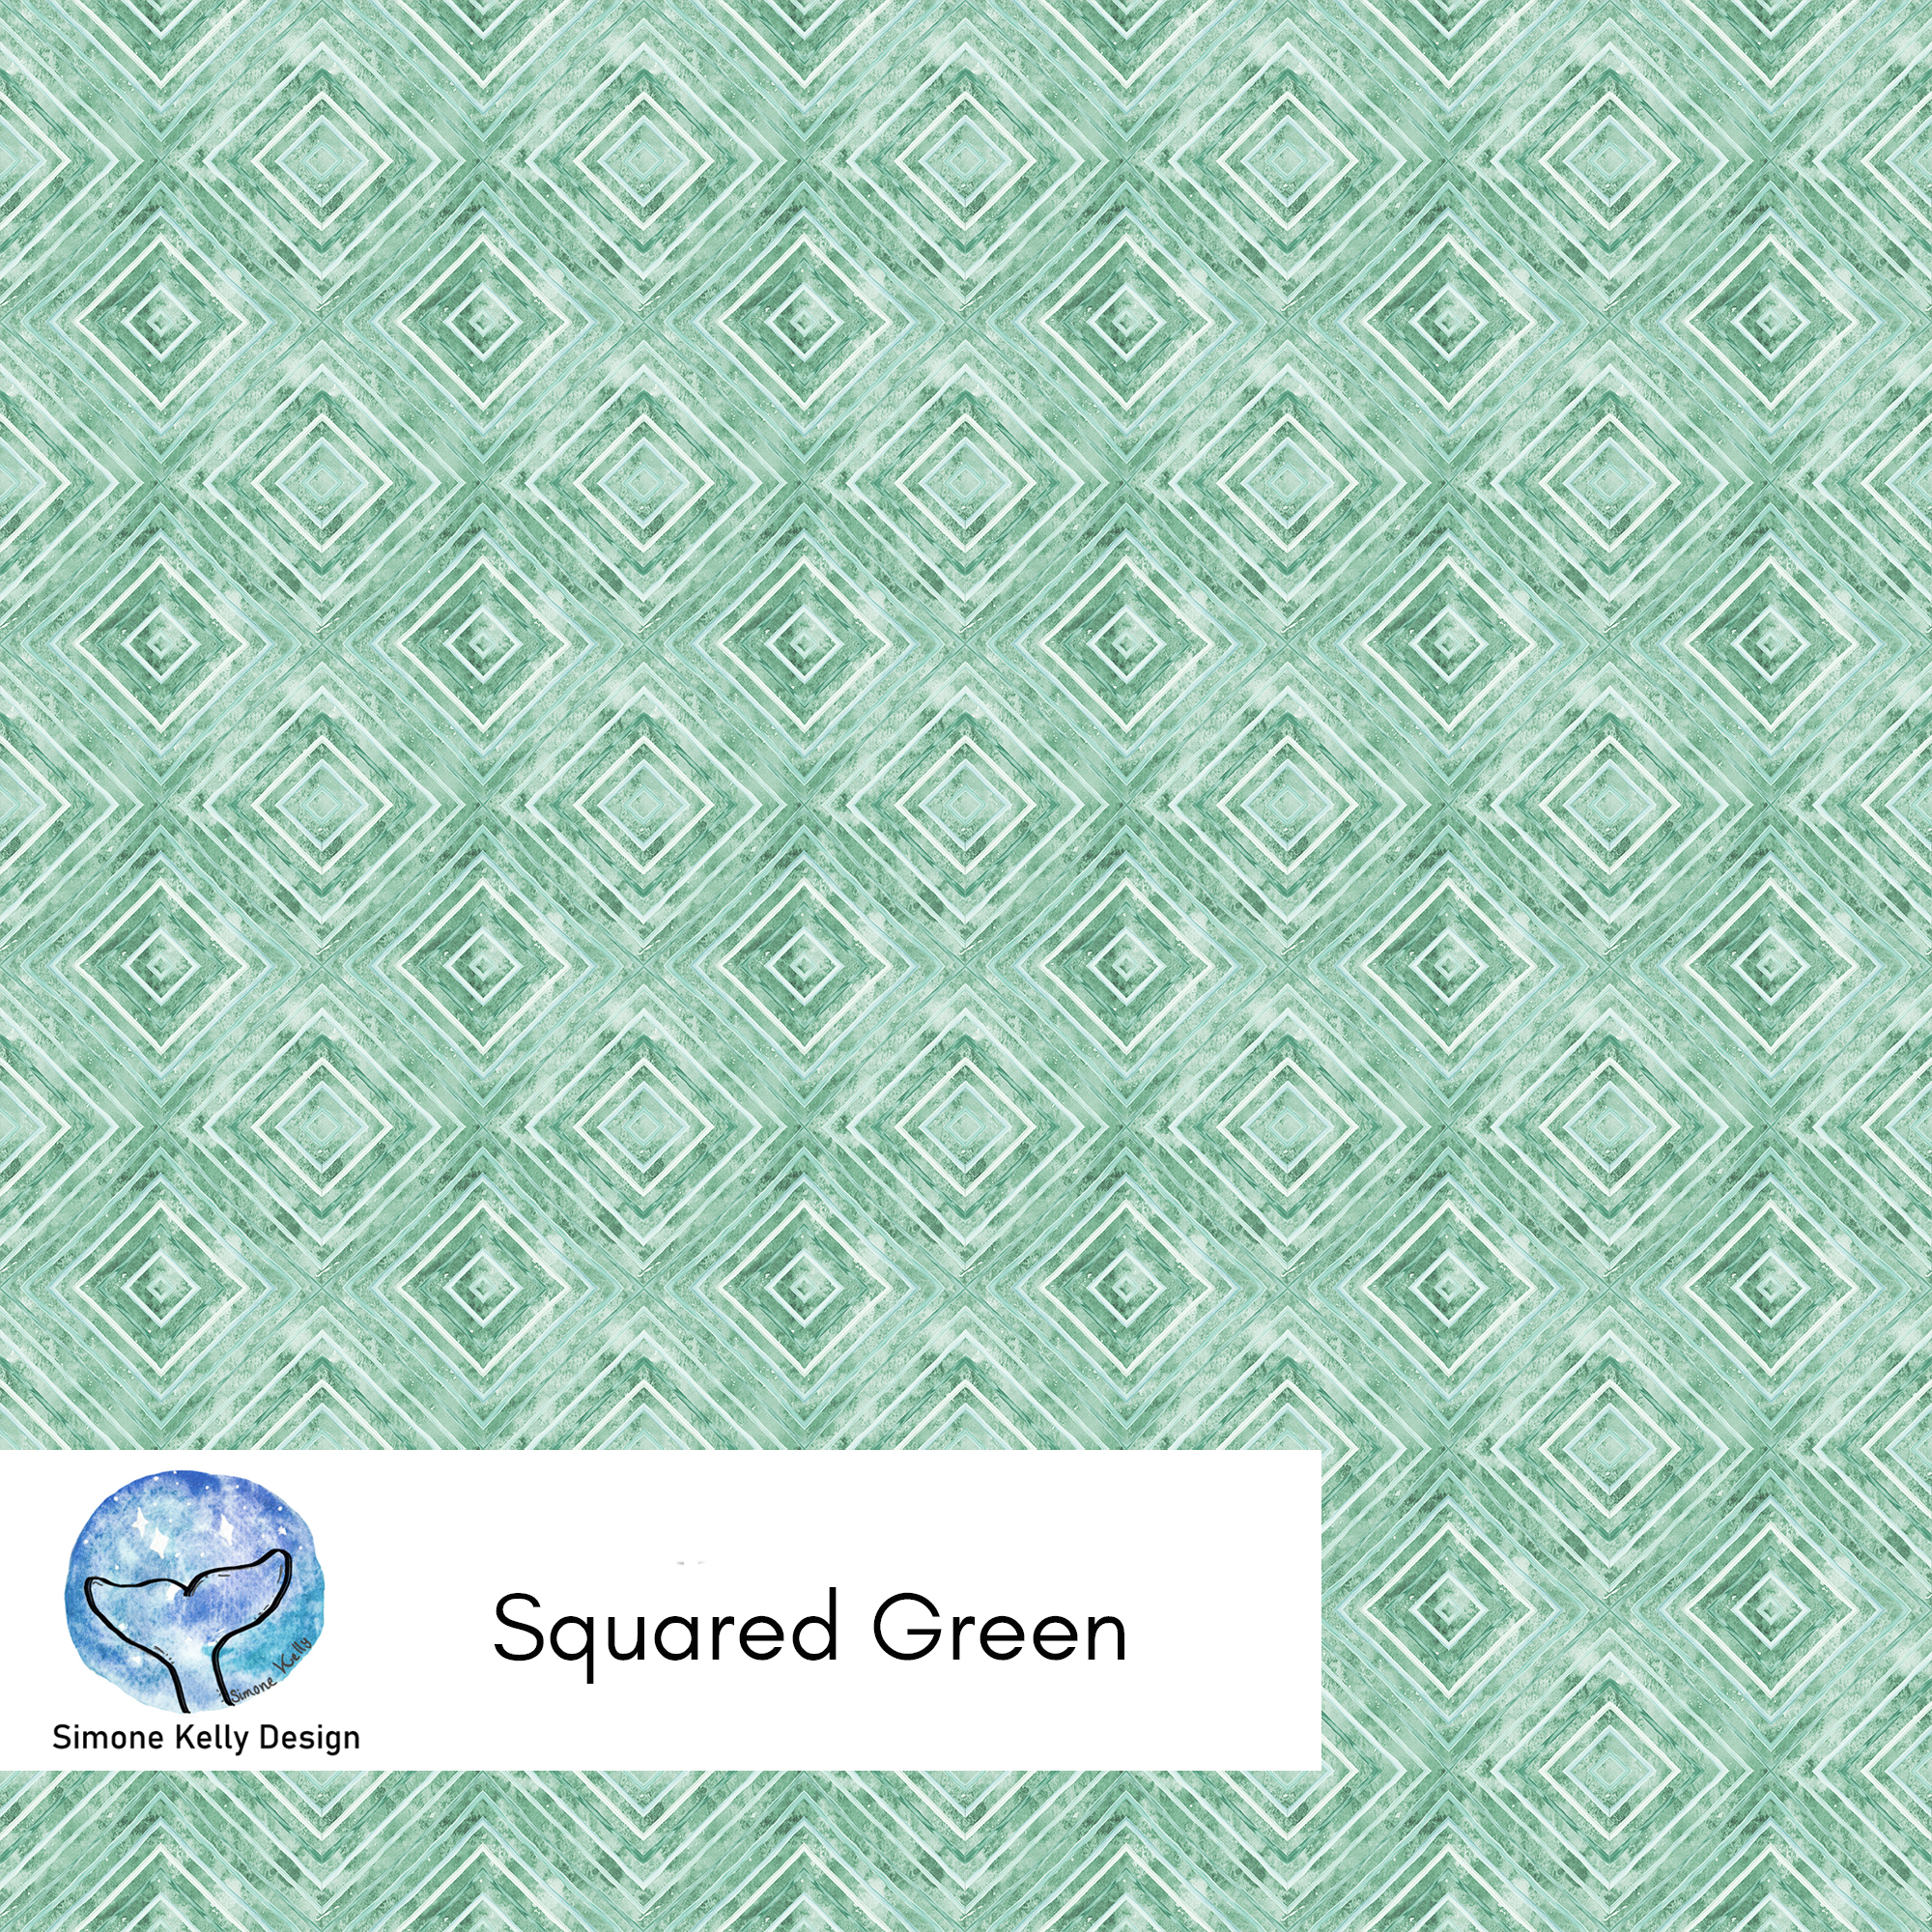 Squared Green